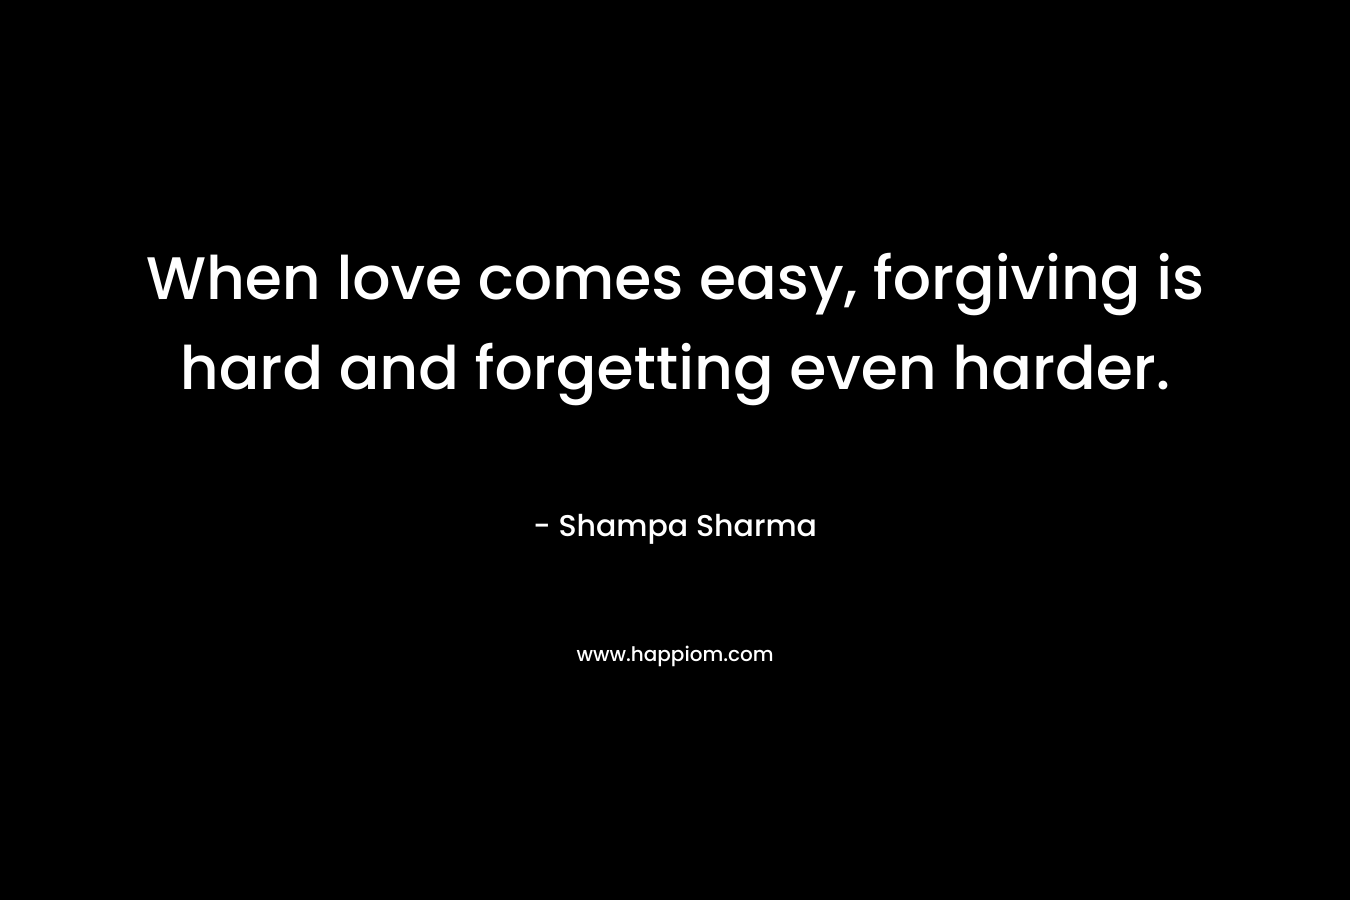 When love comes easy, forgiving is hard and forgetting even harder. – Shampa Sharma